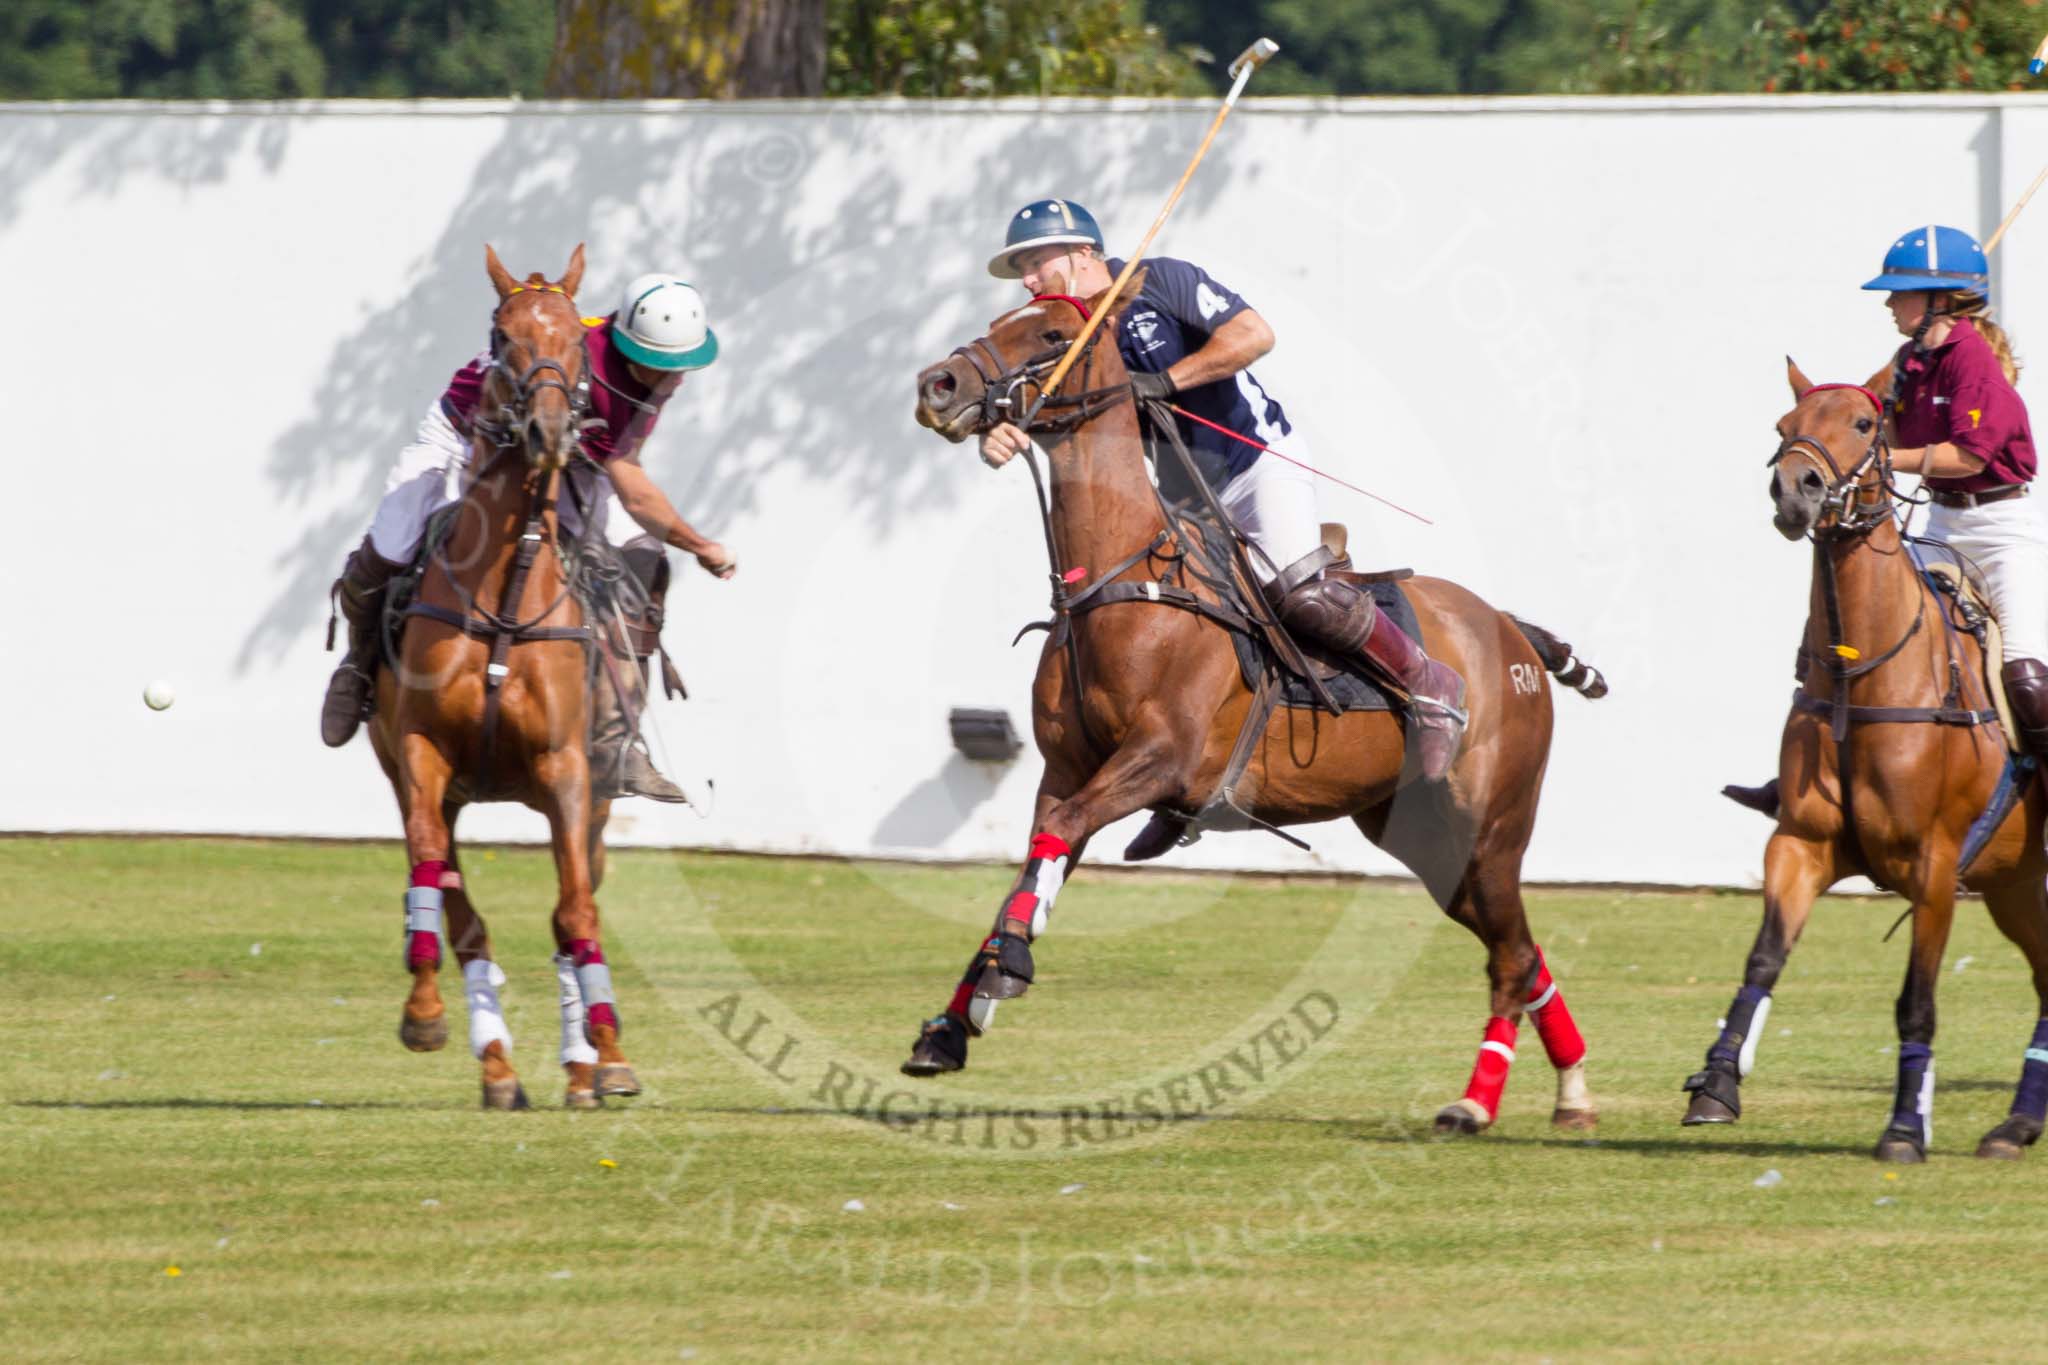 DBPC Polo in the Park 2013, Final of the Amaranther Trophy (0 Goal), Bucking Broncos vs The Inn Team.
Dallas Burston Polo Club, ,
Southam,
Warwickshire,
United Kingdom,
on 01 September 2013 at 11:34, image #109